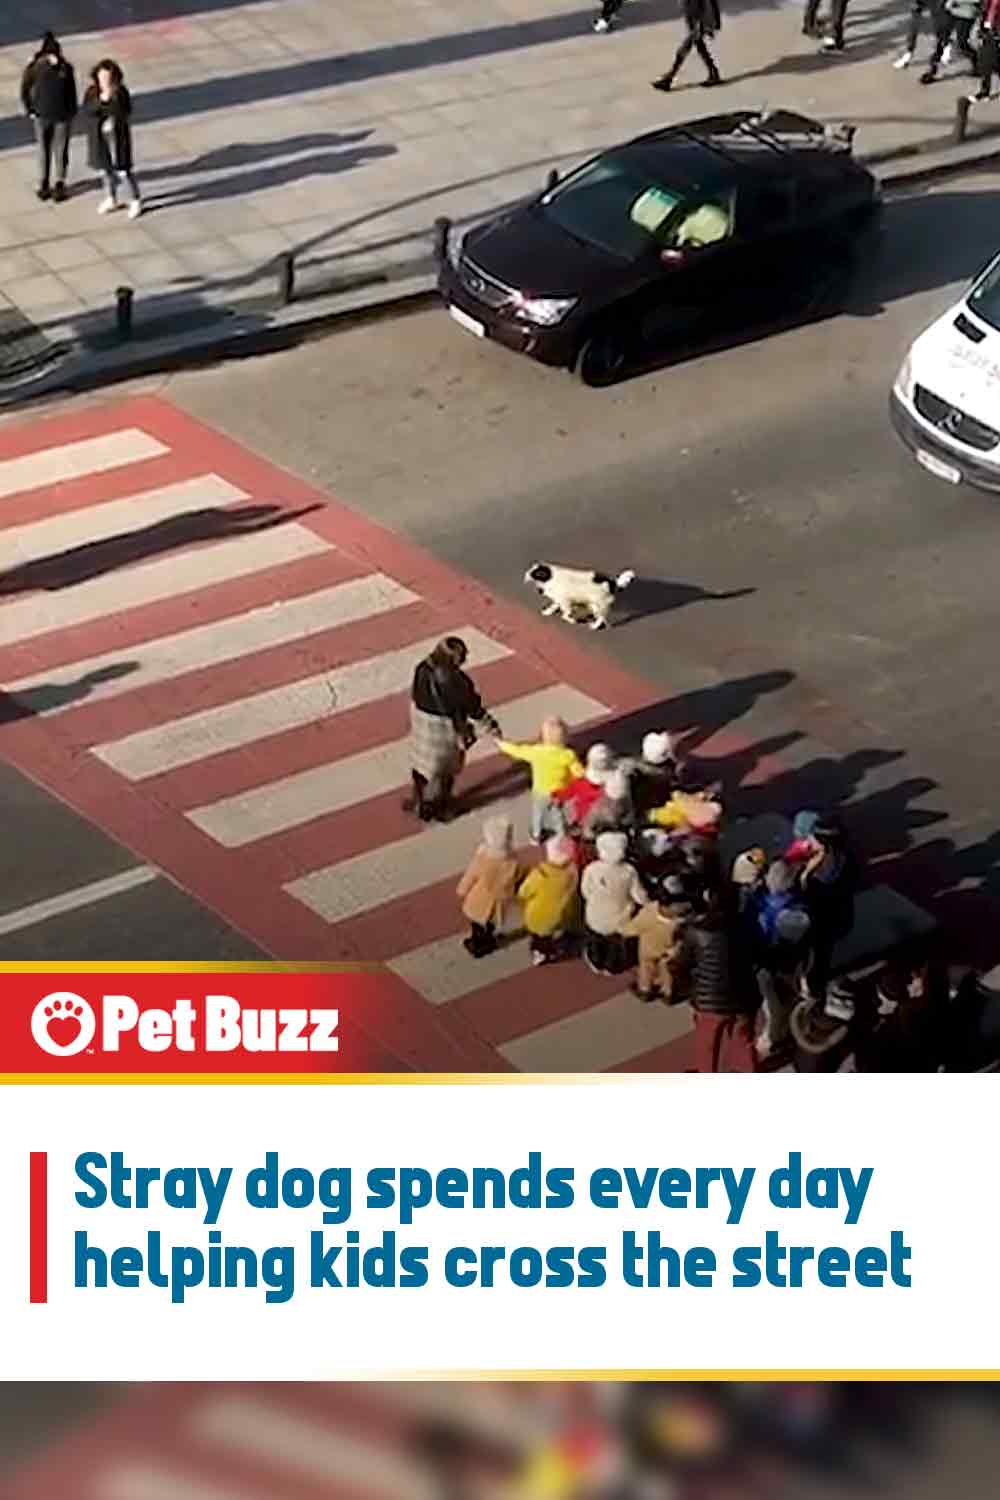 Stray dog spends every day helping kids cross the street